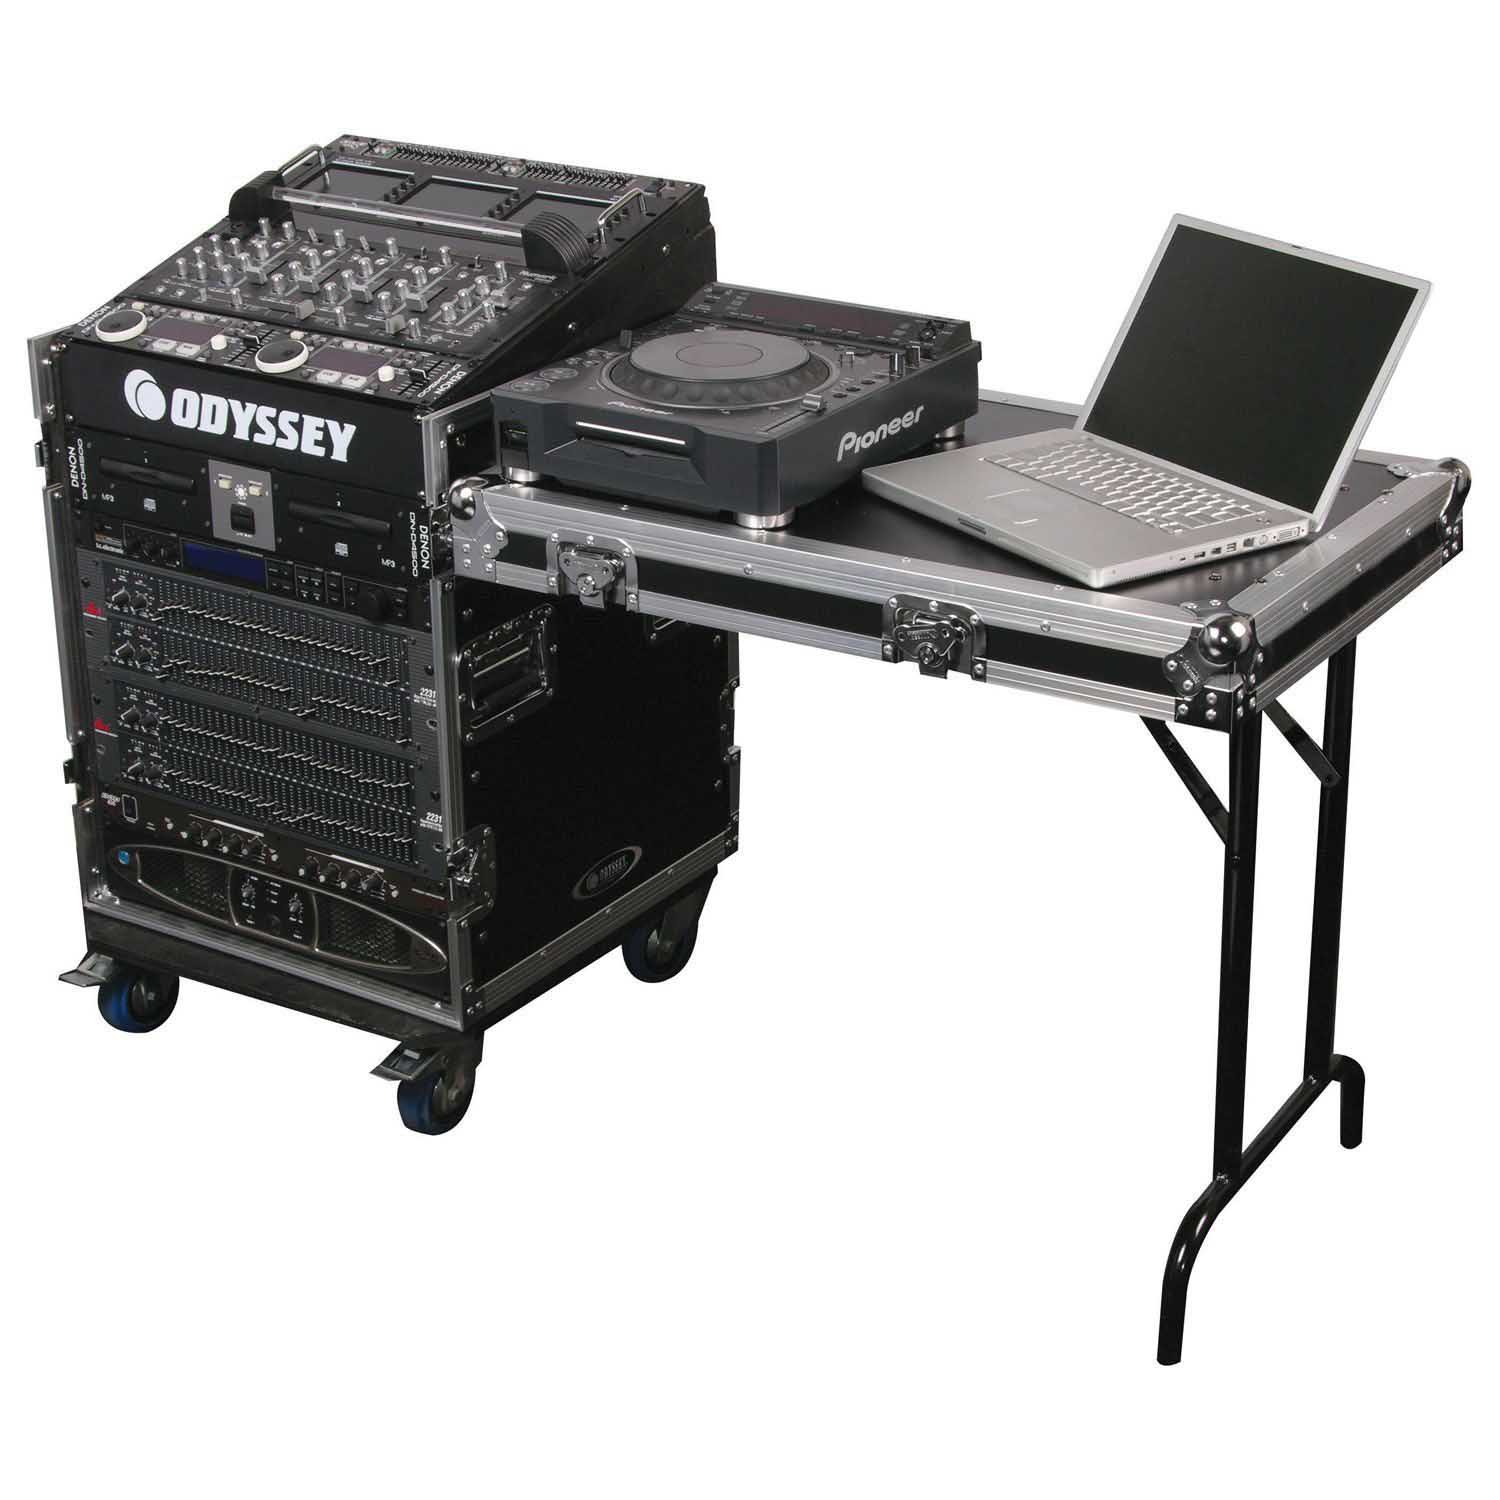 Odyssey FZ1112WDLX 11U Top Slanted 12U Vertical Pro Combo Rack with Side Table and Casters - Hollywood DJ